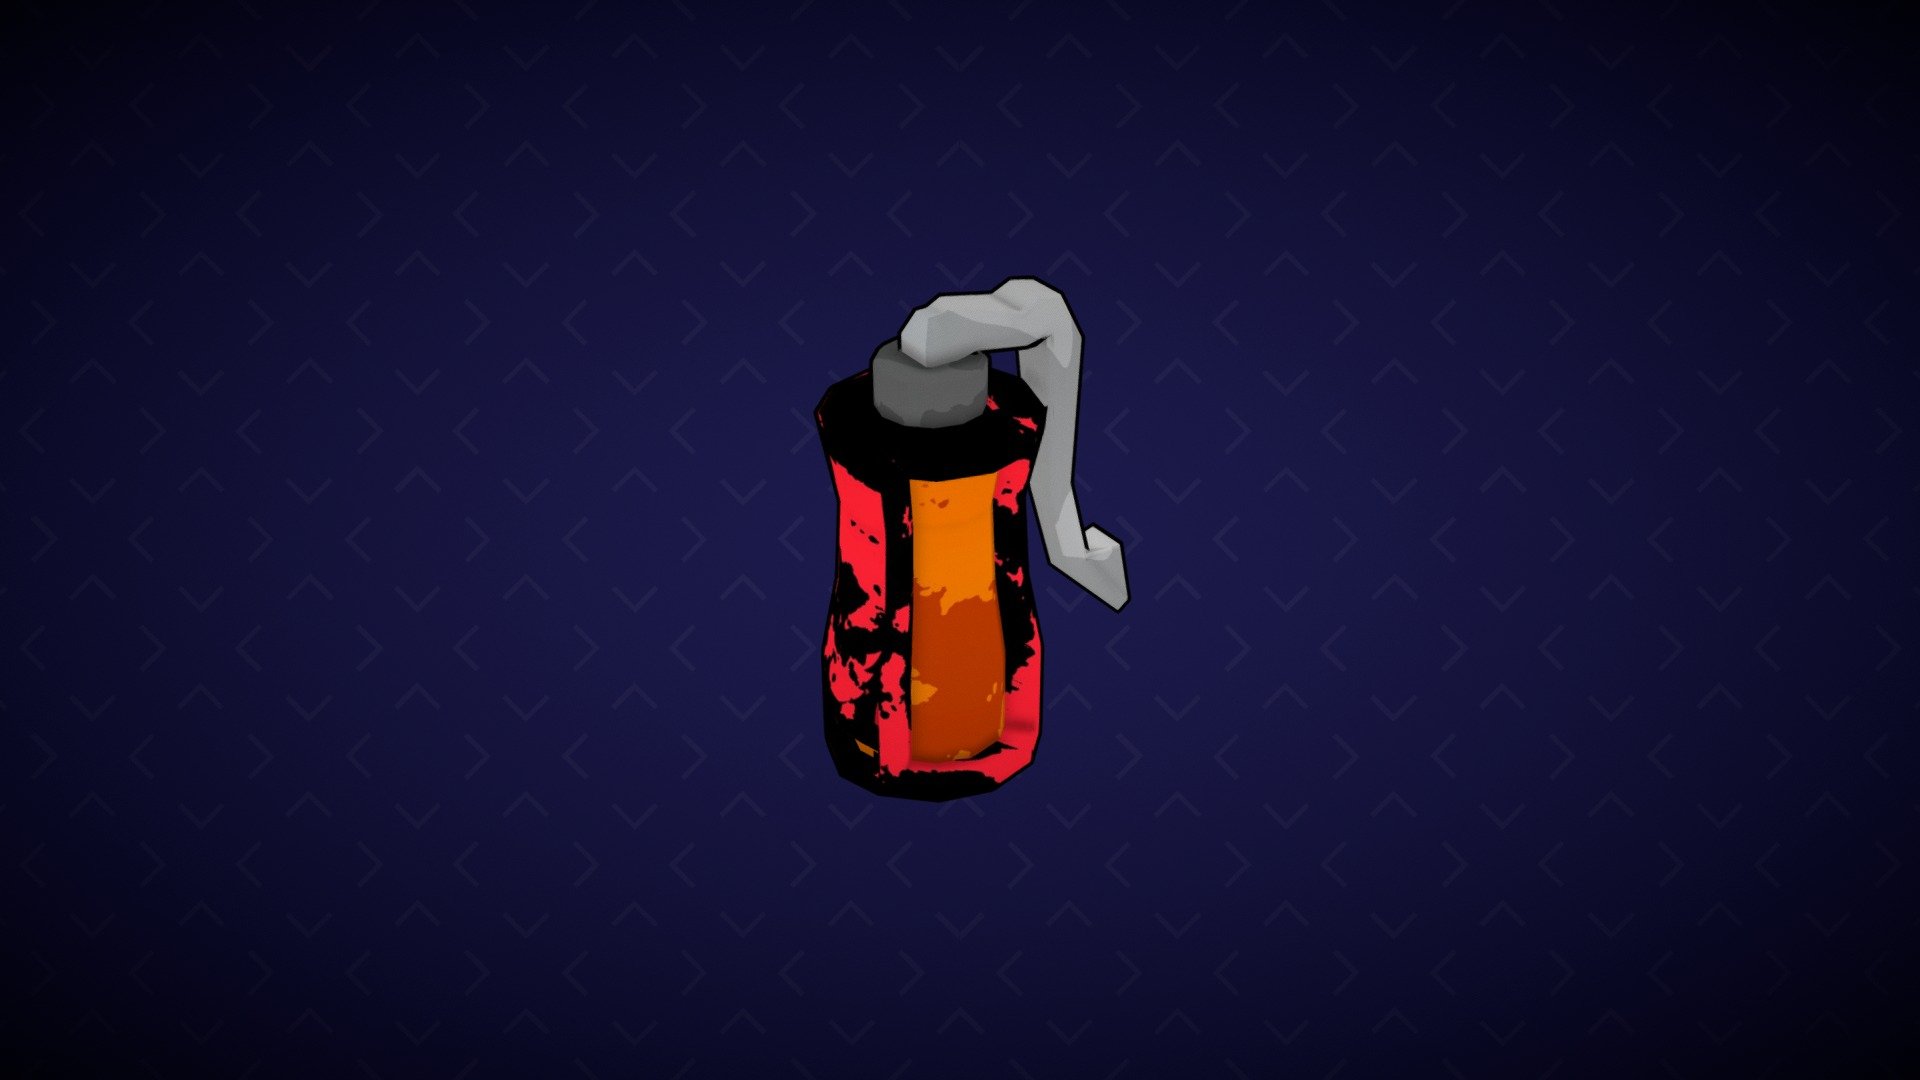 Attempt at a cartoon style grenade game asset for Asset Jam 12 (https://itch.io/jam/asset-jam-12).

Themes to pick from this week were:




Cartoon style, sprites, UI;

Cell shaded characters, environment items;

Playful,  background loops or soundtracks;

Learnt a new technique to achieve this style with outlines (guide here https://sketchfab.com/blogs/community/creating-a-cartoon-outline-for-sketchfab/)

Download none outlined version at:
https://trashart.itch.io/cartoon-style-grenade - Cartoon Style Grenade - Download Free 3D model by trashart (@trash-art) 3d model